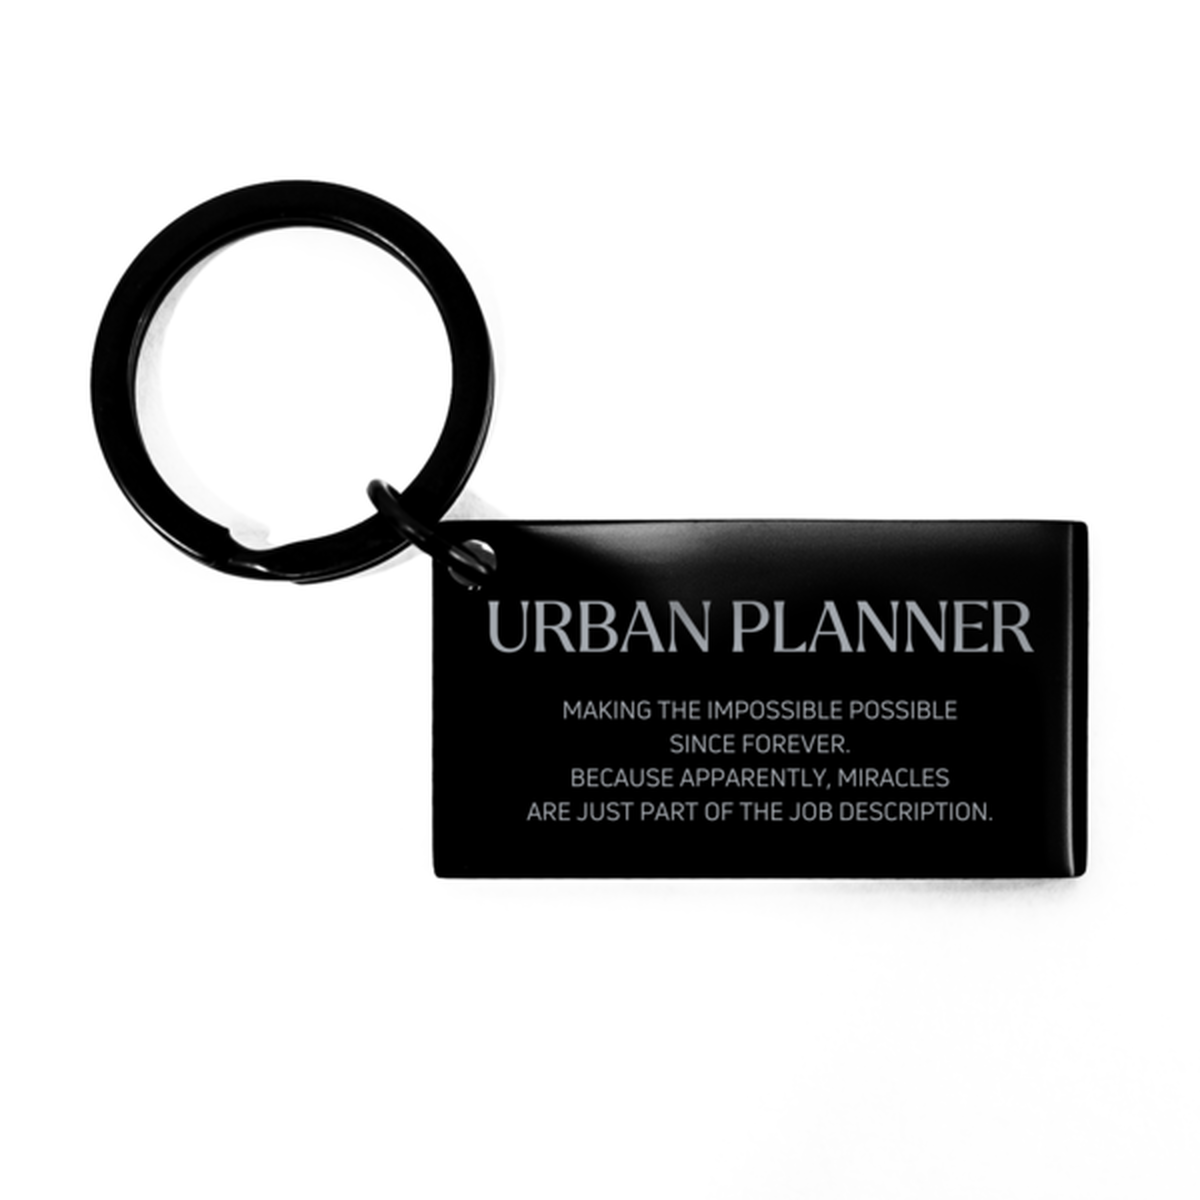 Funny Urban Planner Gifts, Miracles are just part of the job description, Inspirational Birthday Keychain For Urban Planner, Men, Women, Coworkers, Friends, Boss